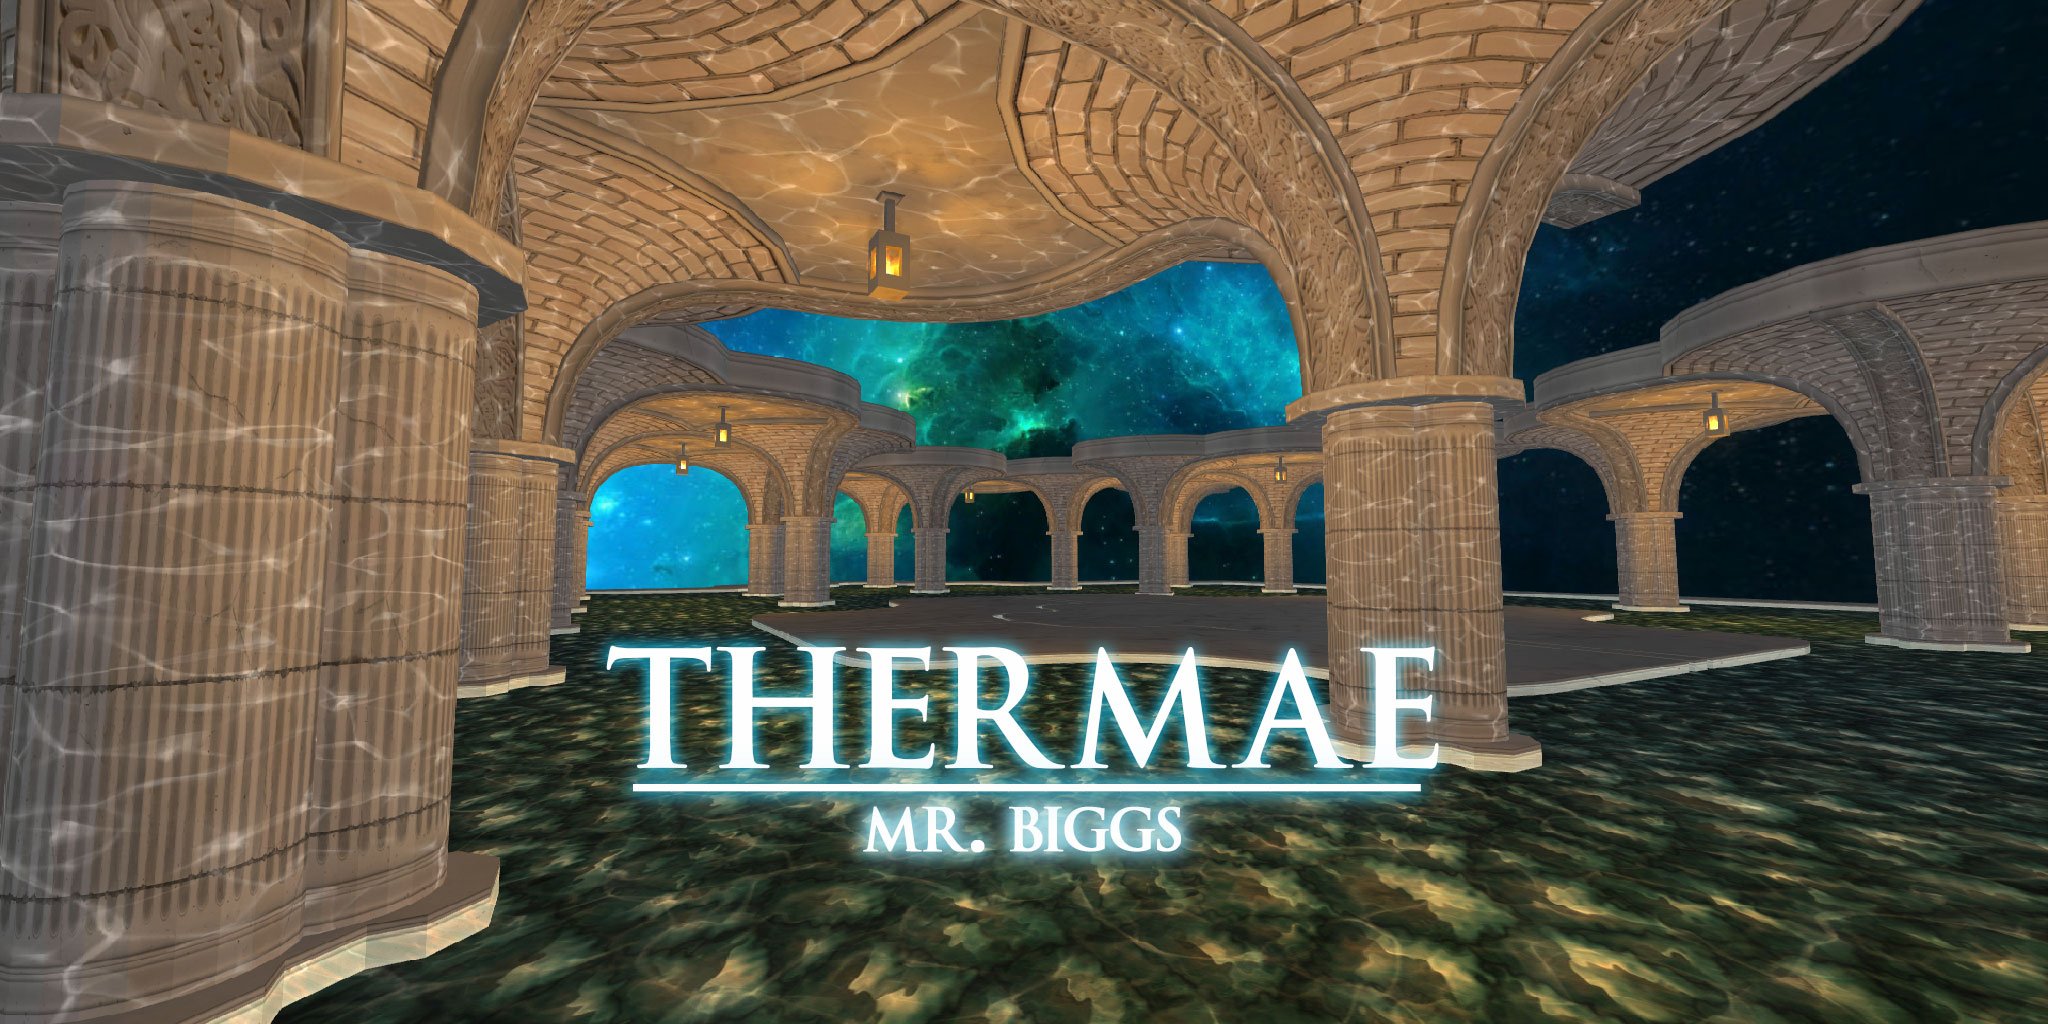 More information about "Thermae"